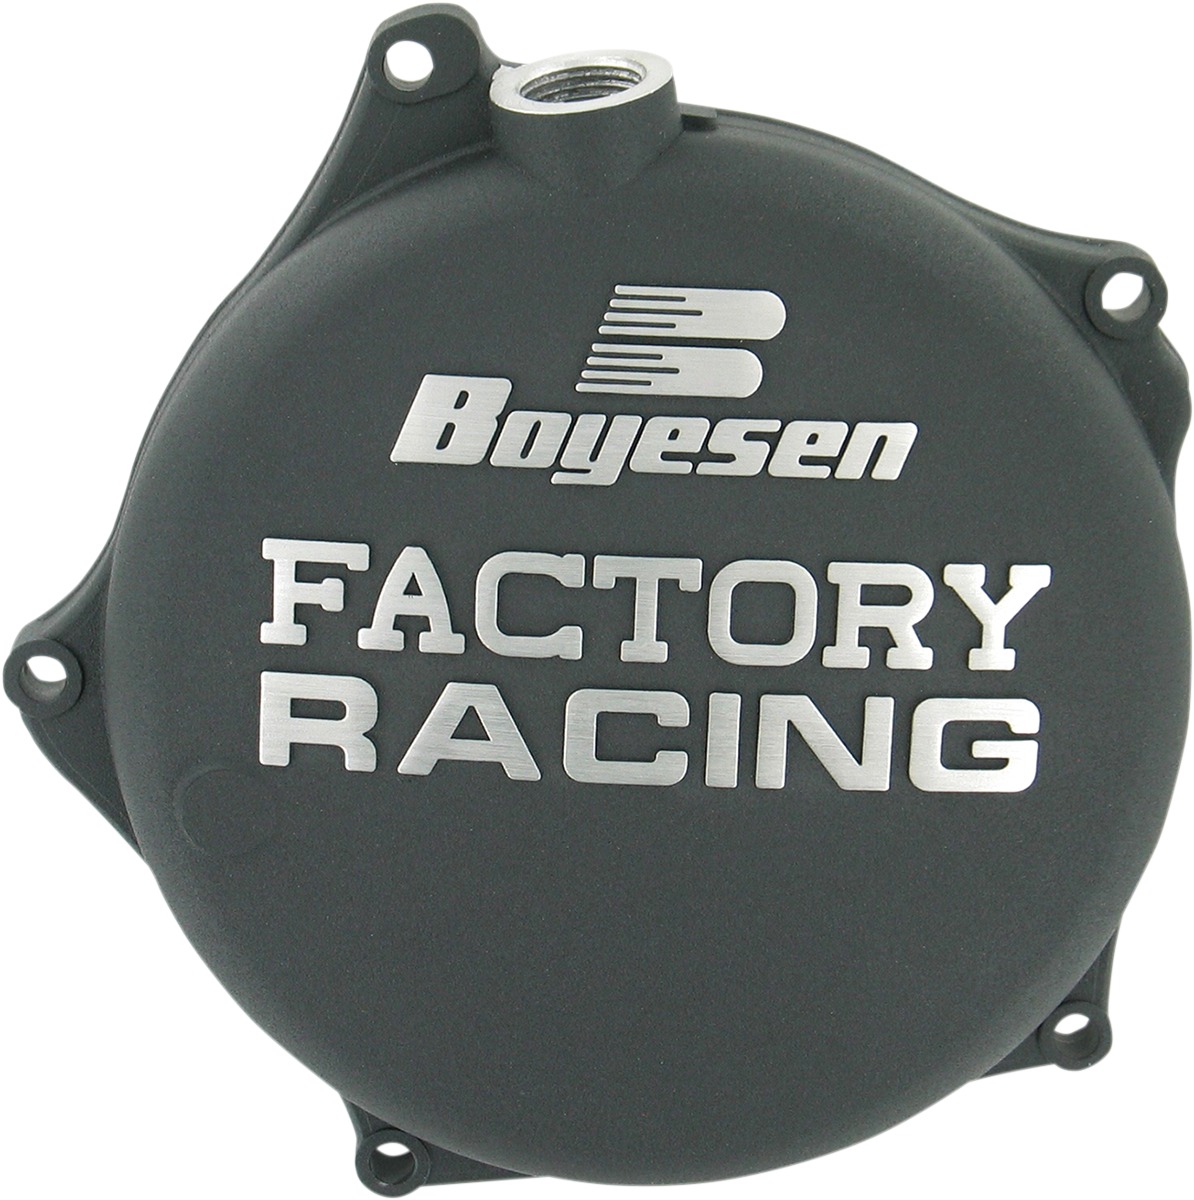 Factory Racing Clutch Cover - Black - For 09-18 Kawasaki KX250F - Click Image to Close